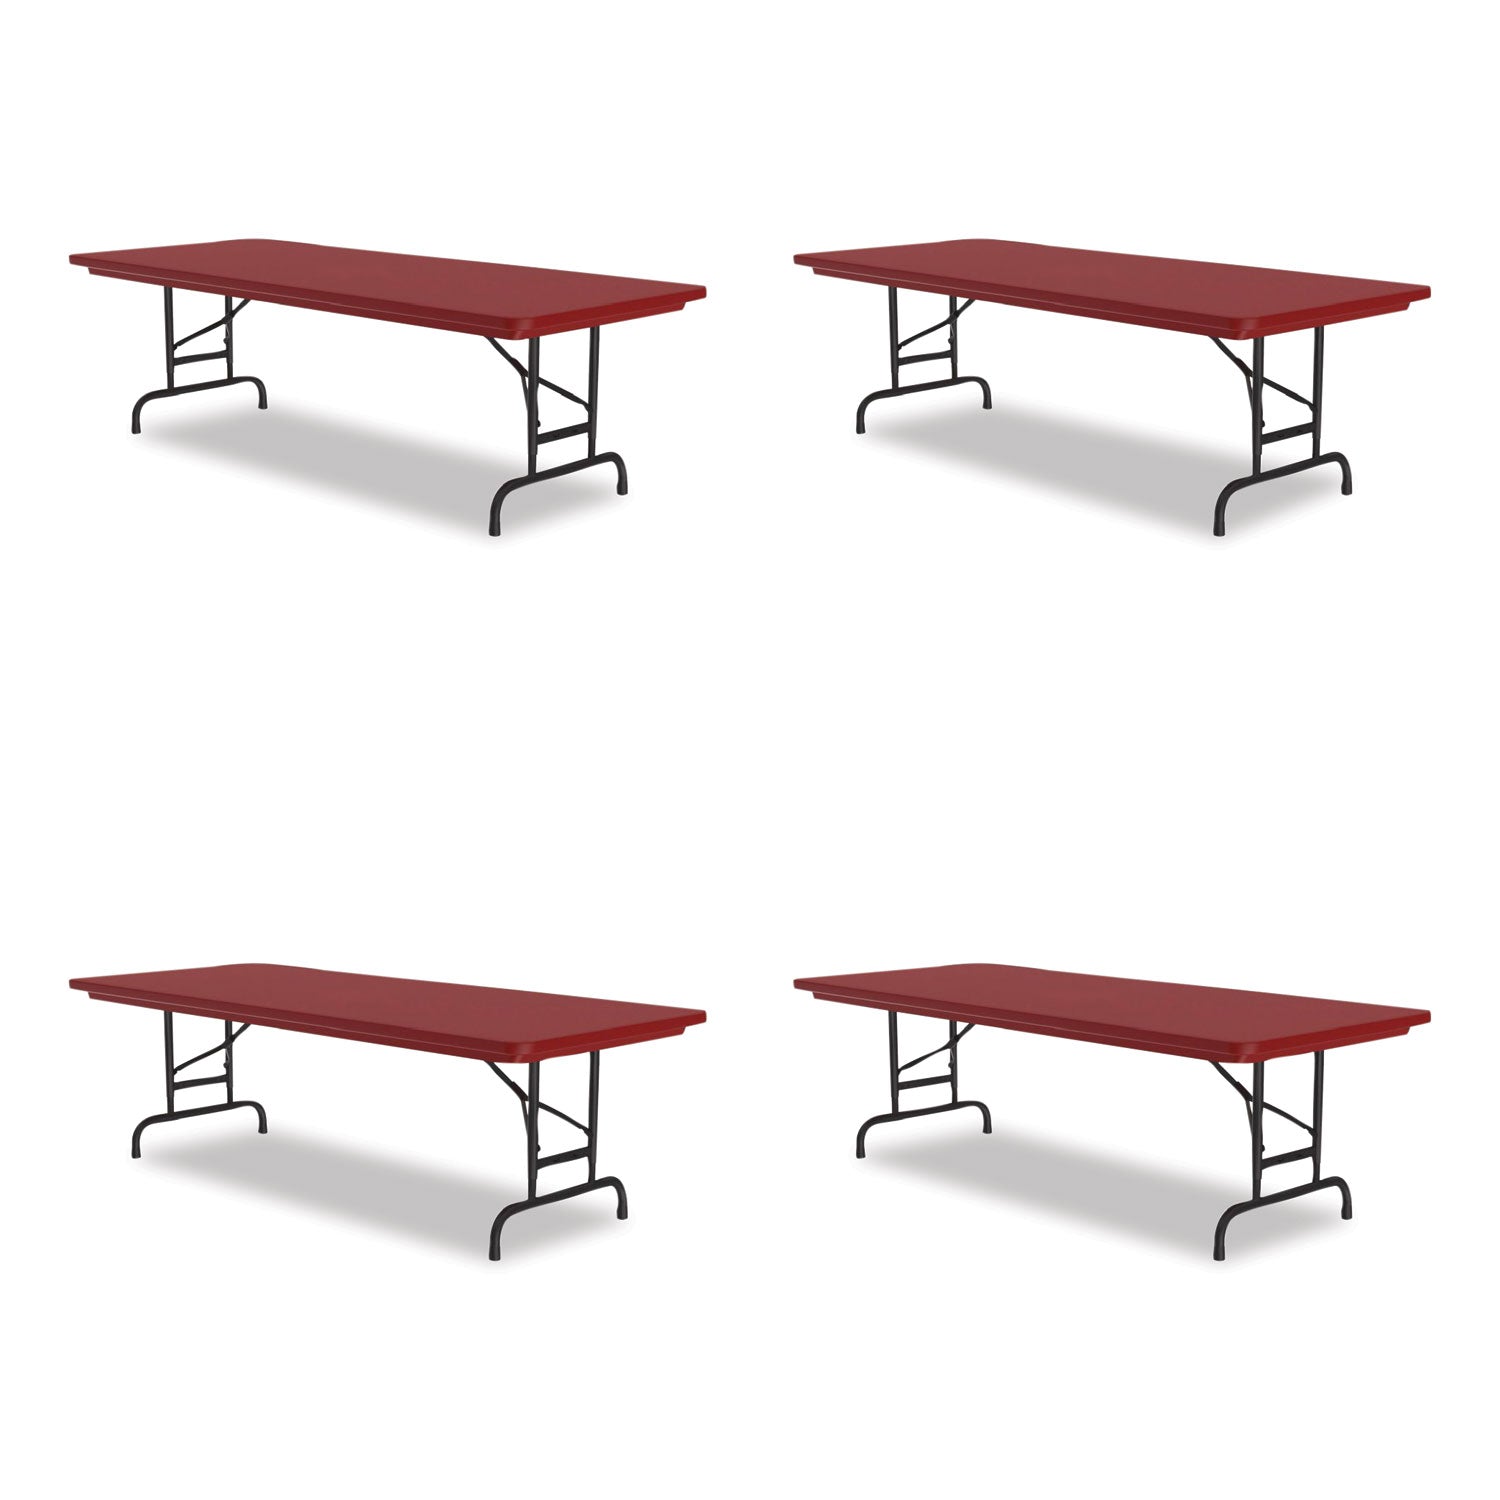 adjustable-folding-tables-rectangular-60-x-30-x-22-to-32-red-top-black-legs-4-pallet-ships-in-4-6-business-days_crlra3060254p - 1